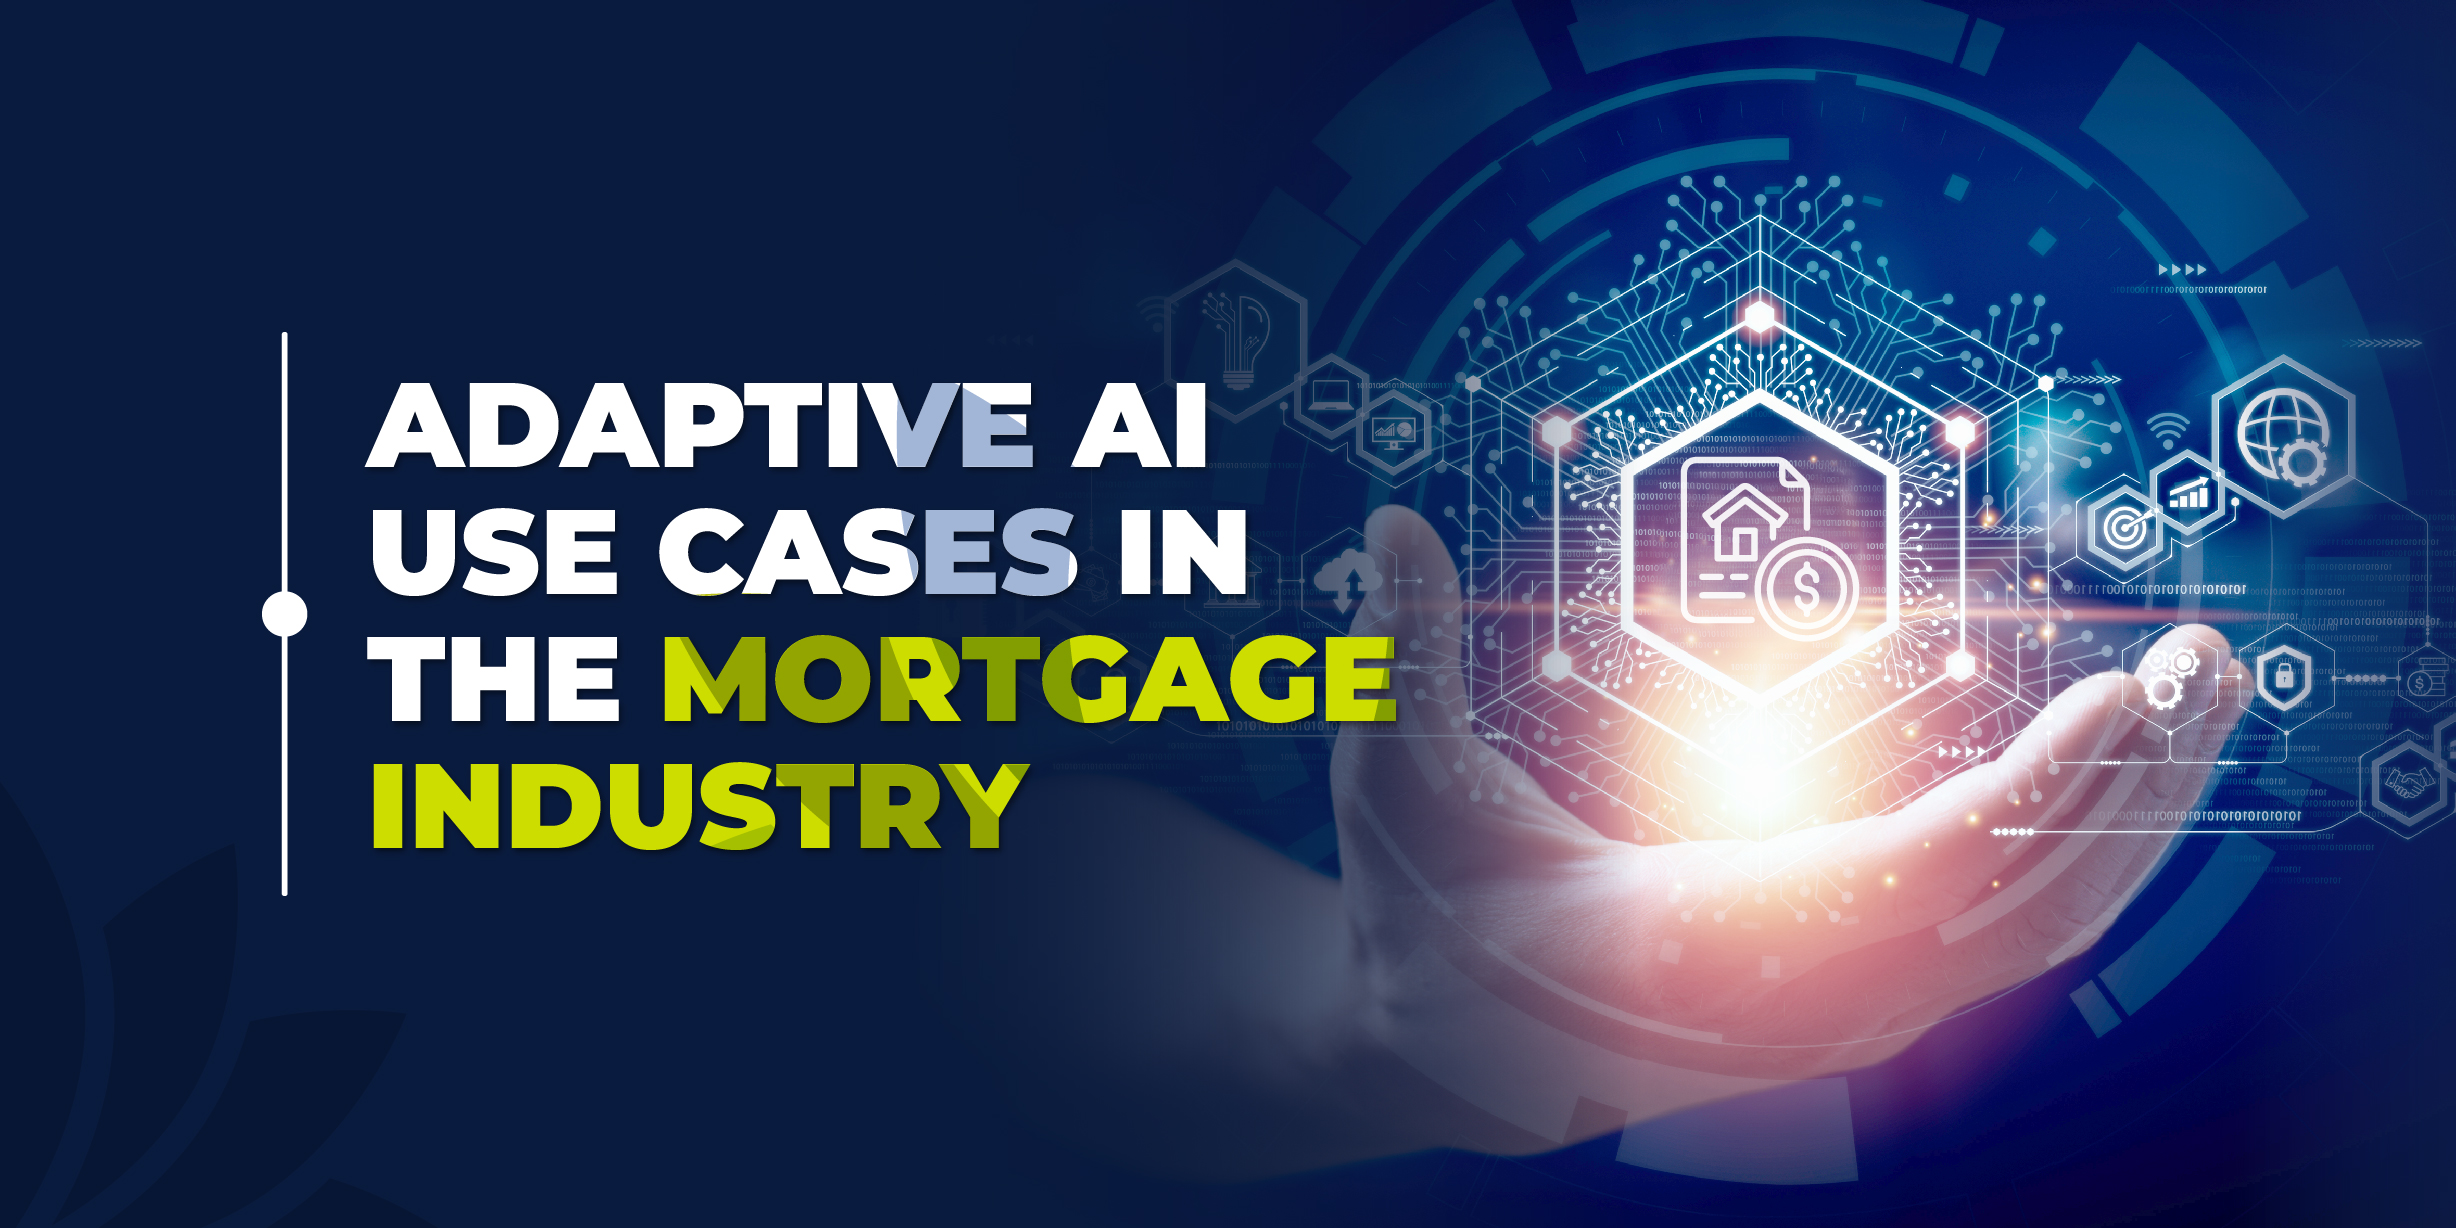 Adaptive AI Use Cases in the Mortgage Industry